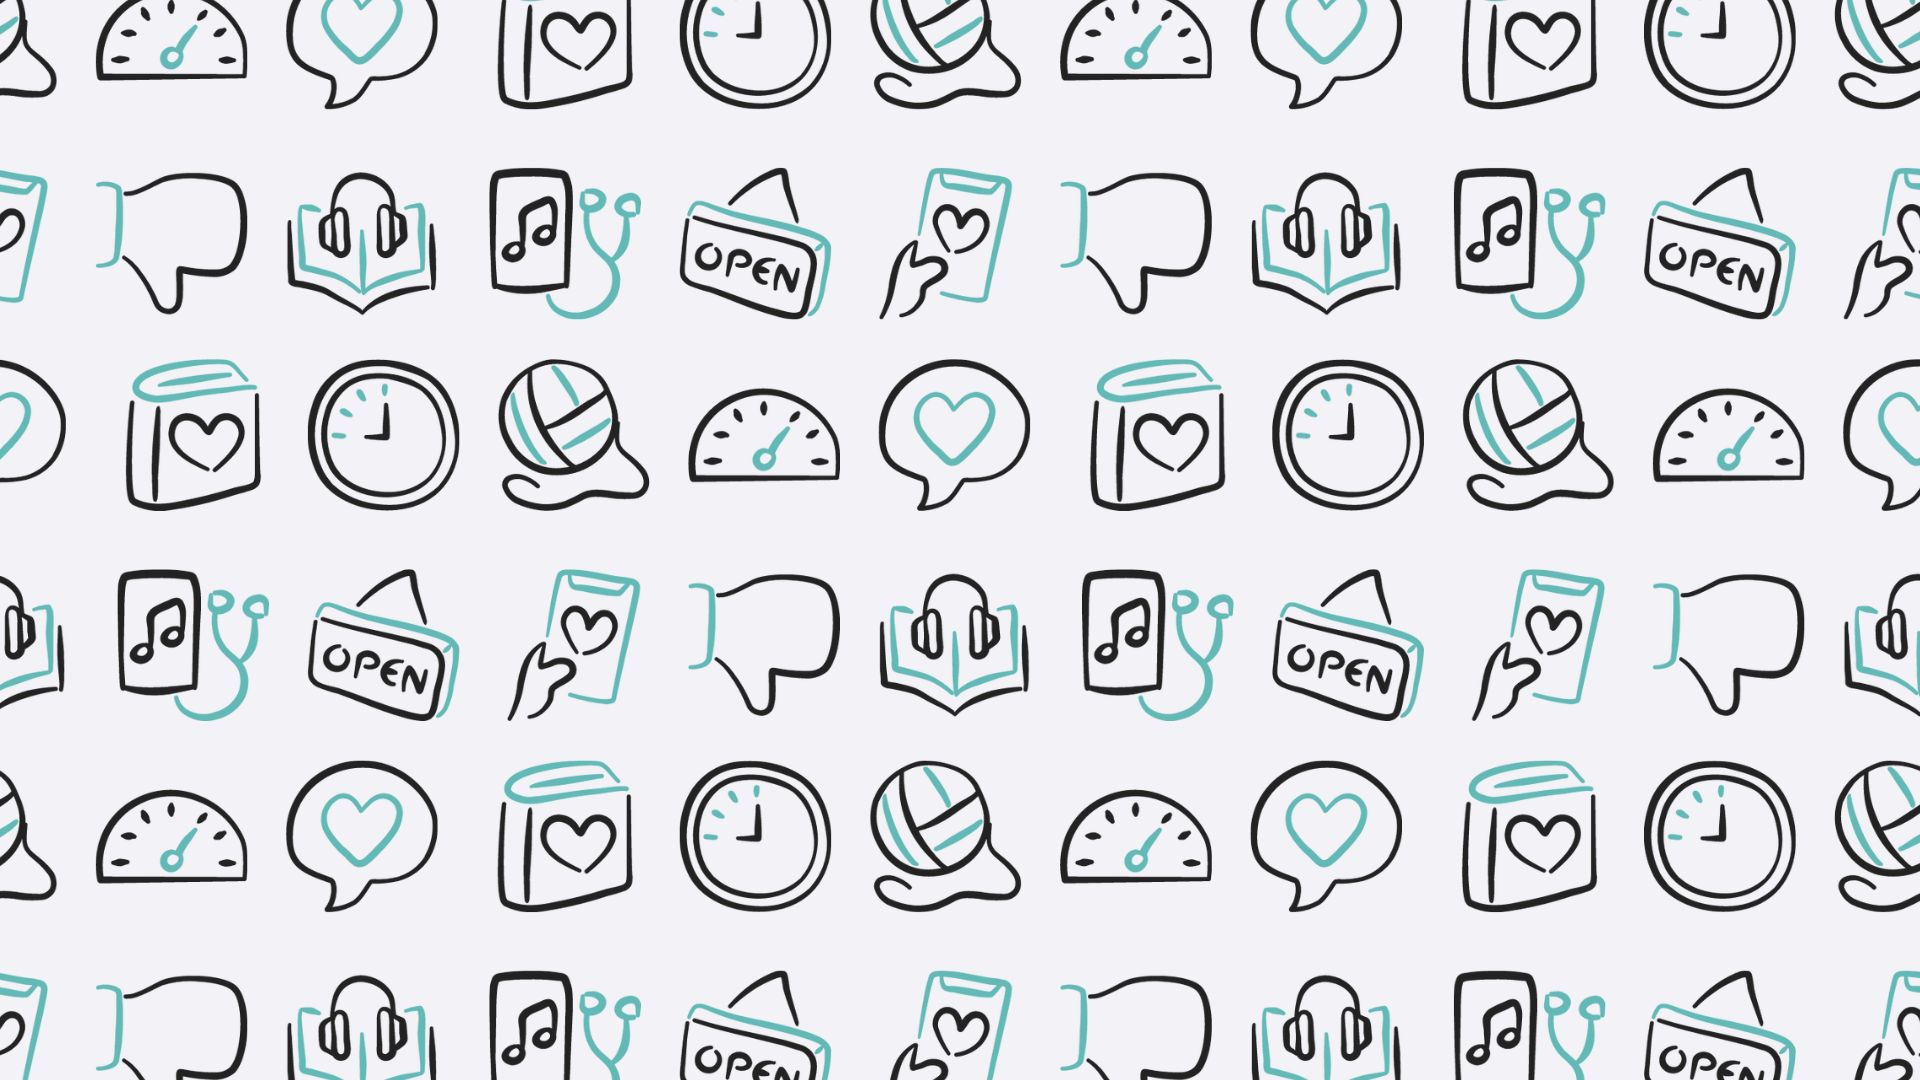 Icons showing black and teal phones, books, headphones, and more.